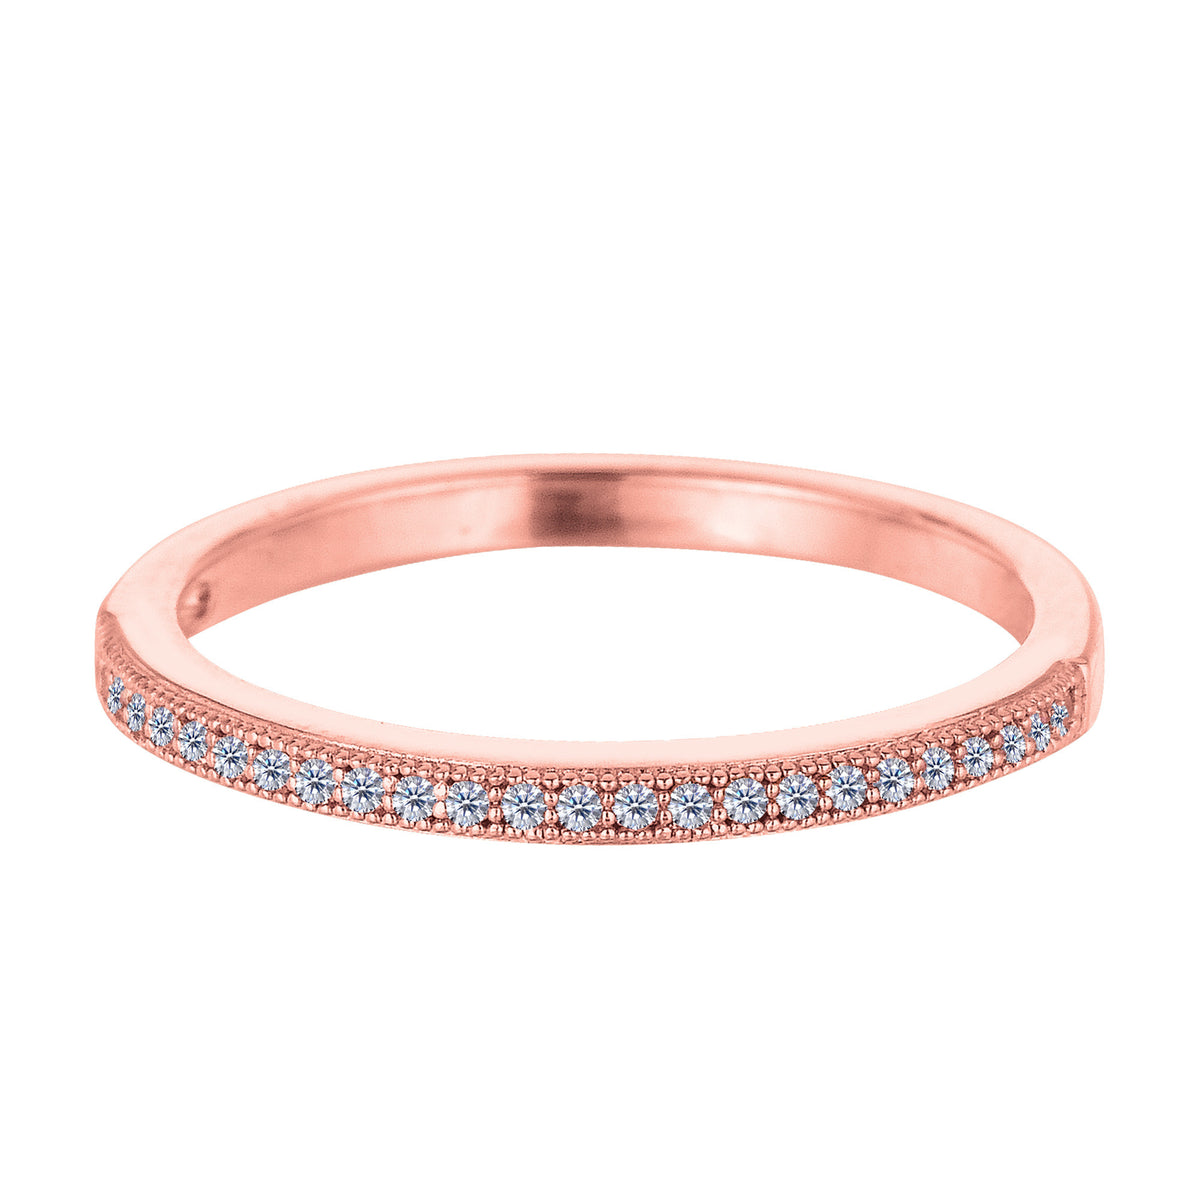 Sterling Silver Rose Tone Finish Milgrain Stackable Ring With Pave' Set Cz Stones - JewelryAffairs
 - 1